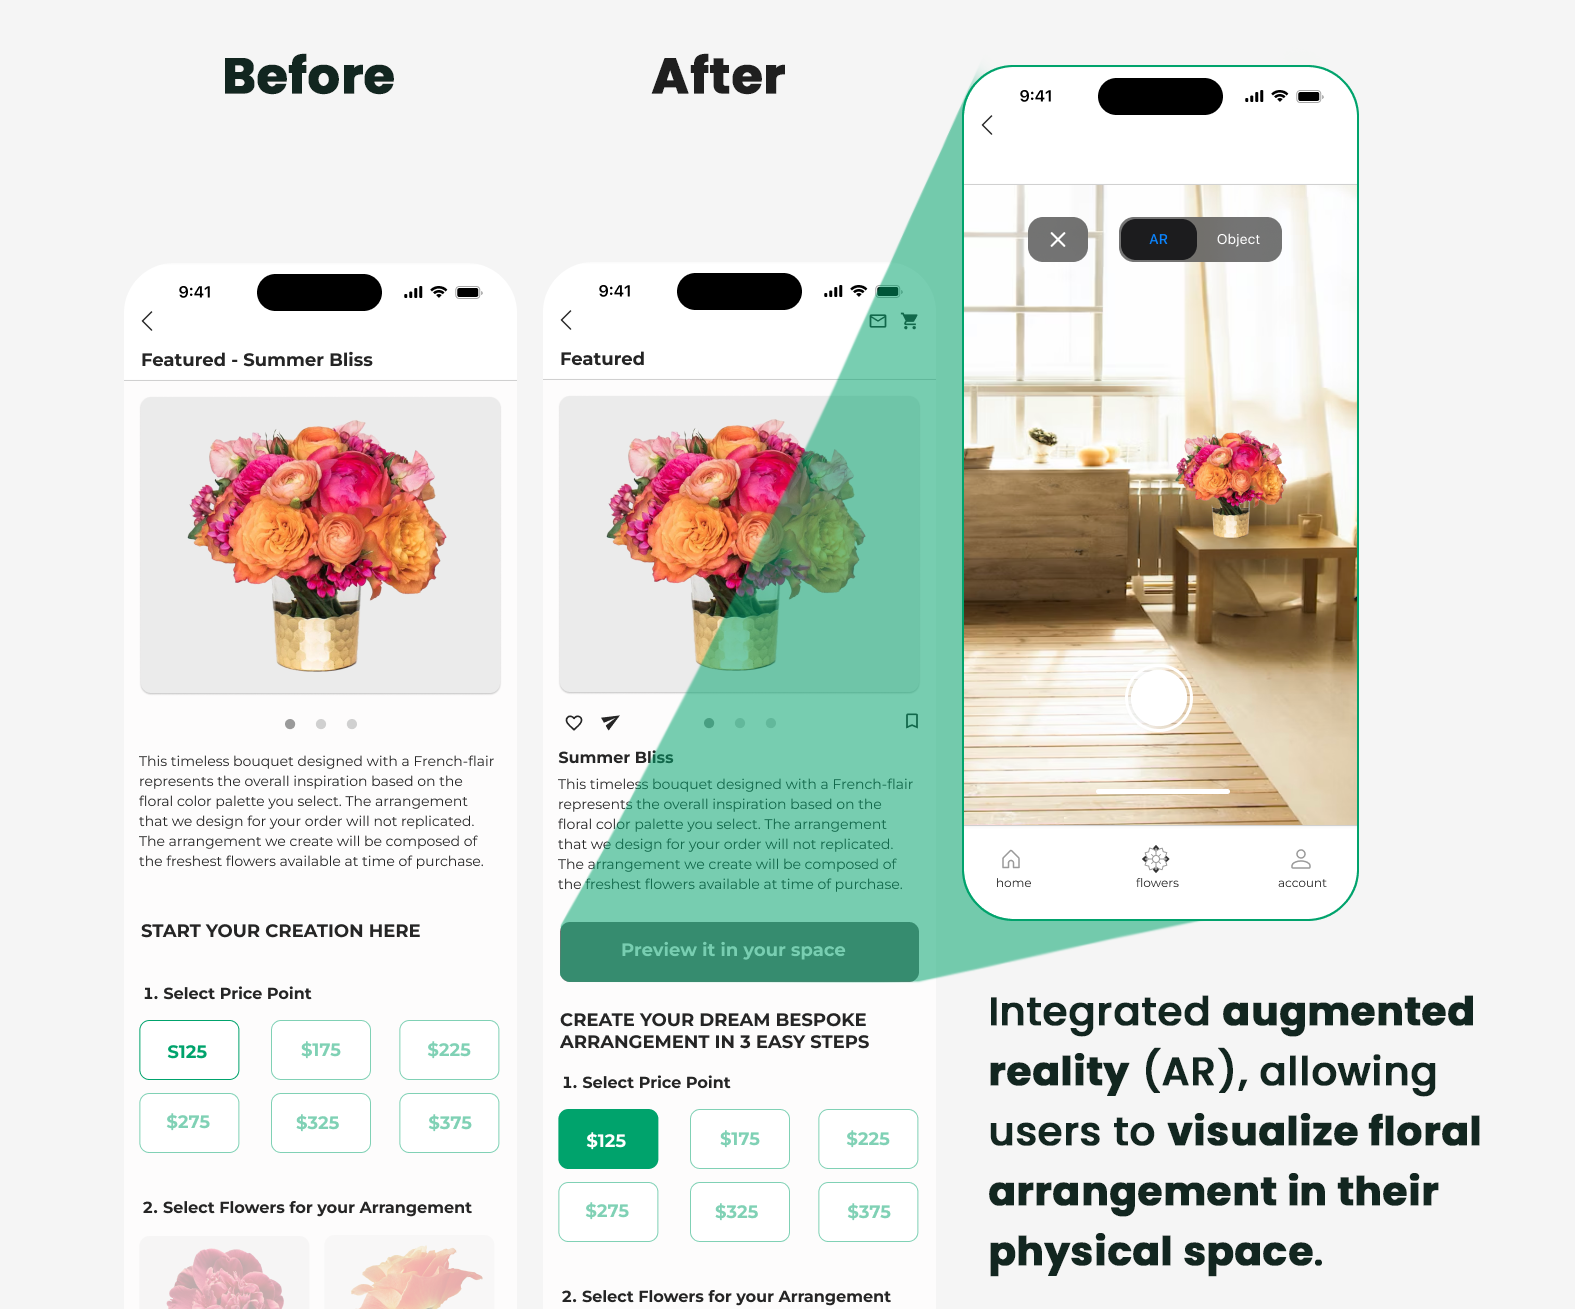 ui ux integrated augmented reality function